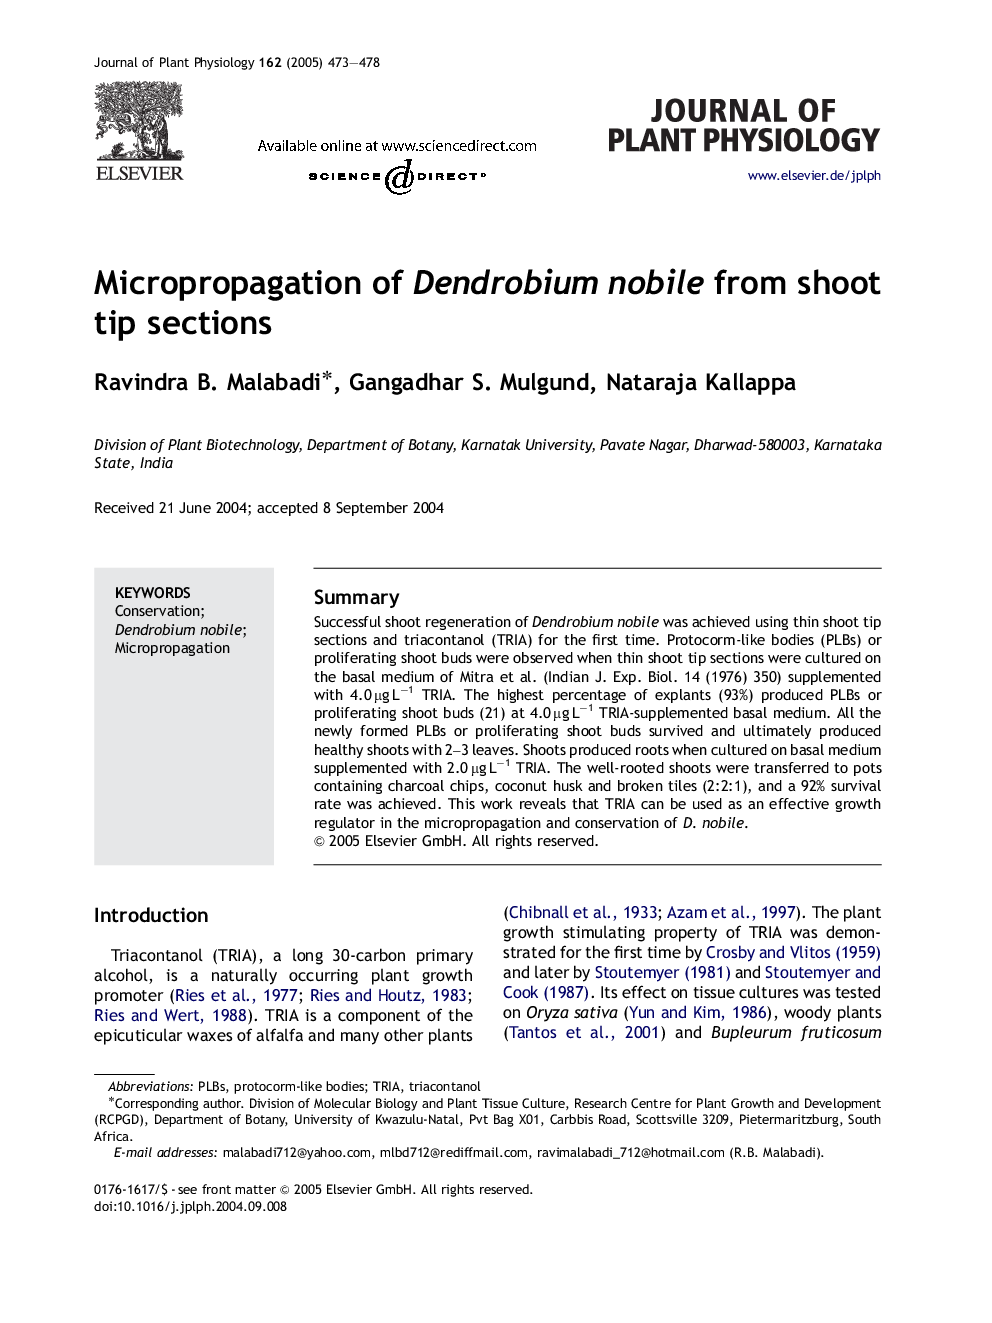 Micropropagation of Dendrobium nobile from shoot tip sections